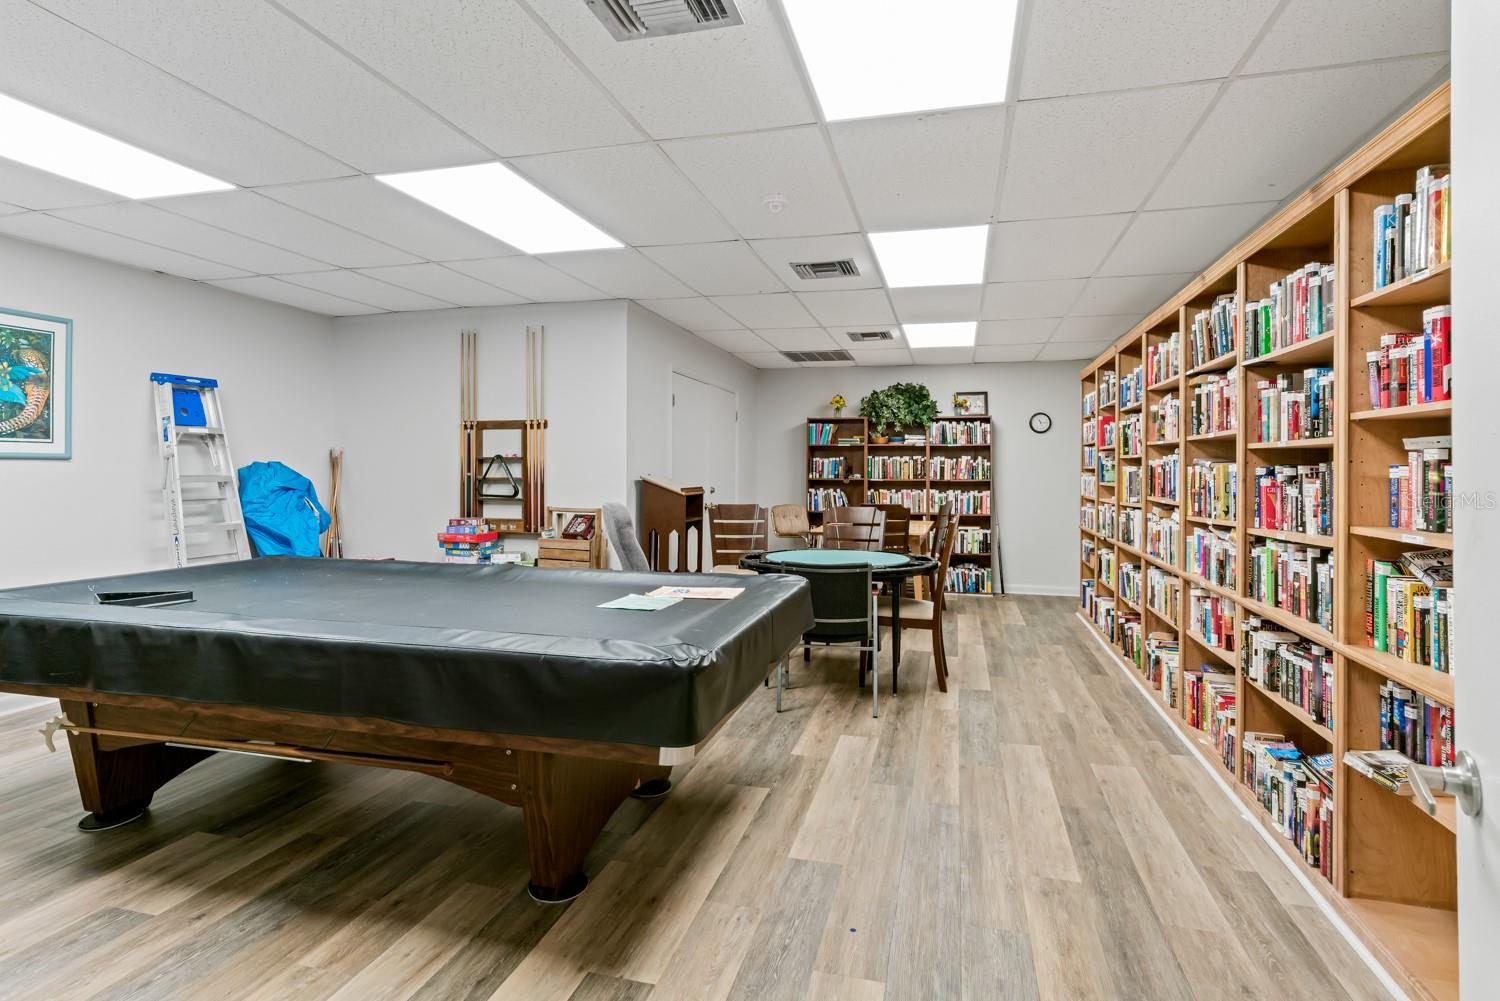 Billiard's and community library